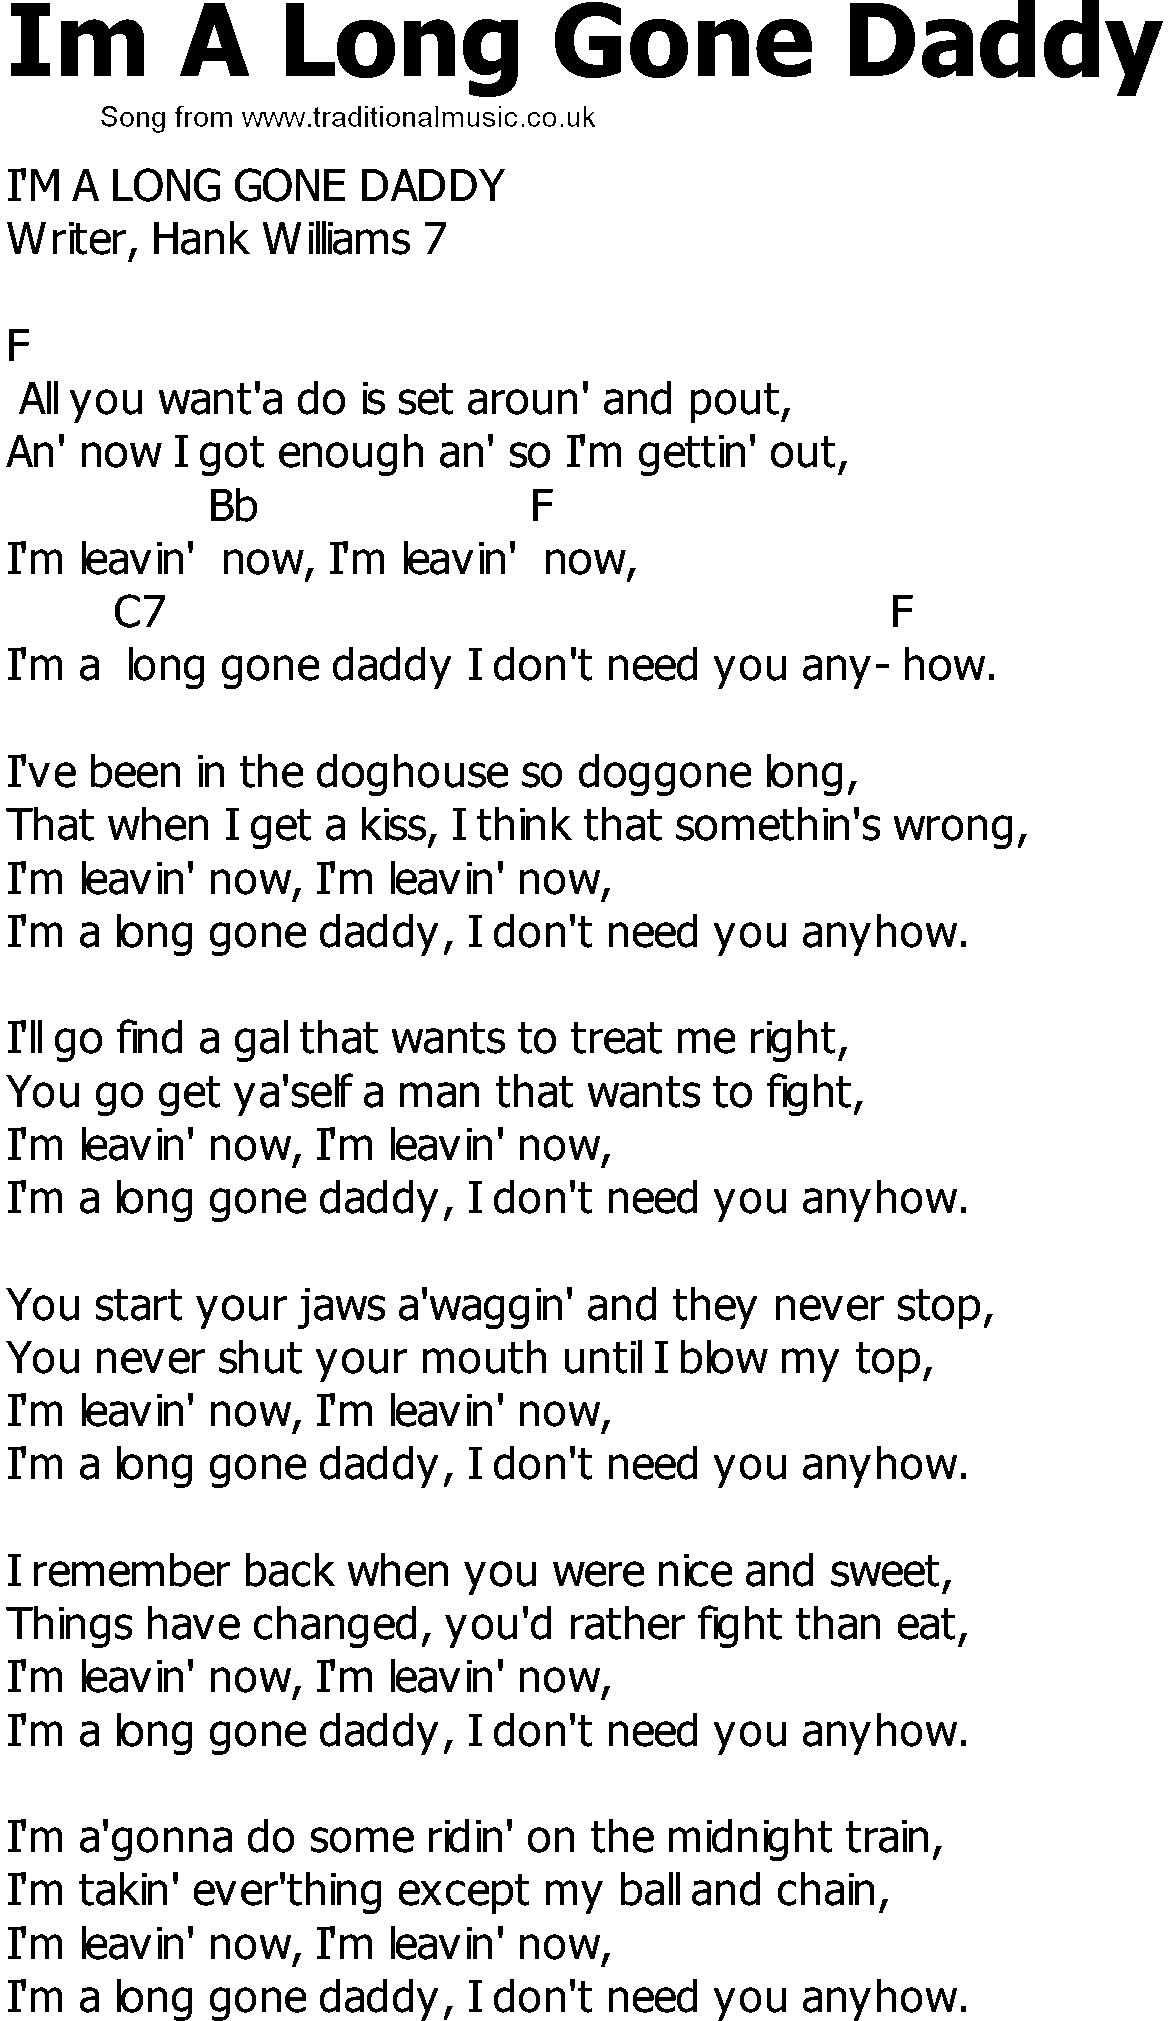 Old Country song lyrics with chords - Im A Long Gone Daddy